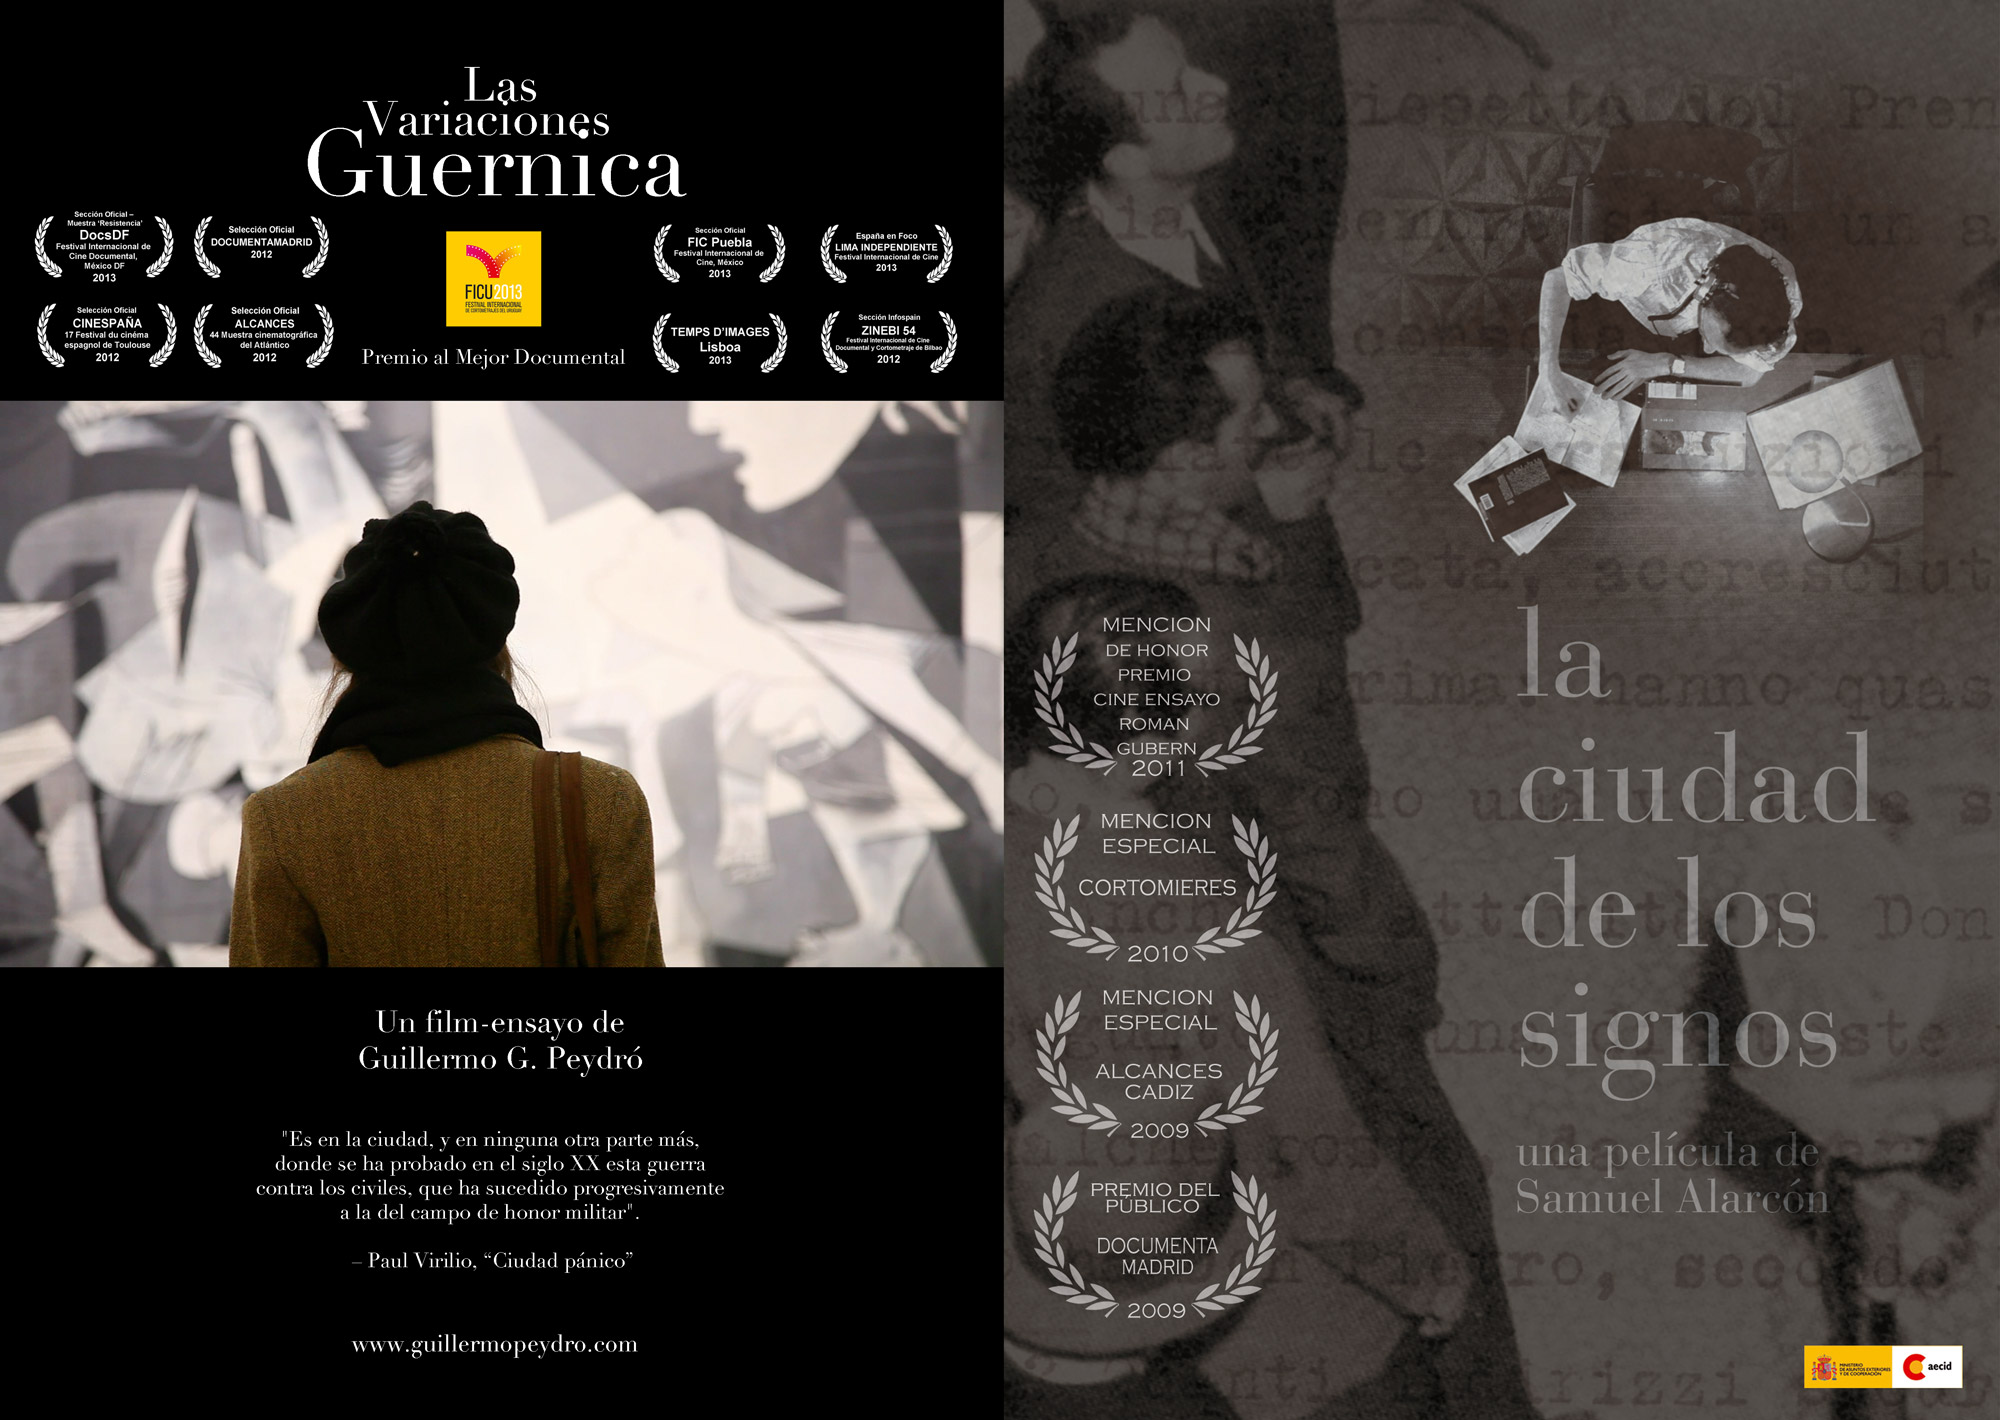 [Meet the Filmmakers! The Guernica Variations and City of Signs] 